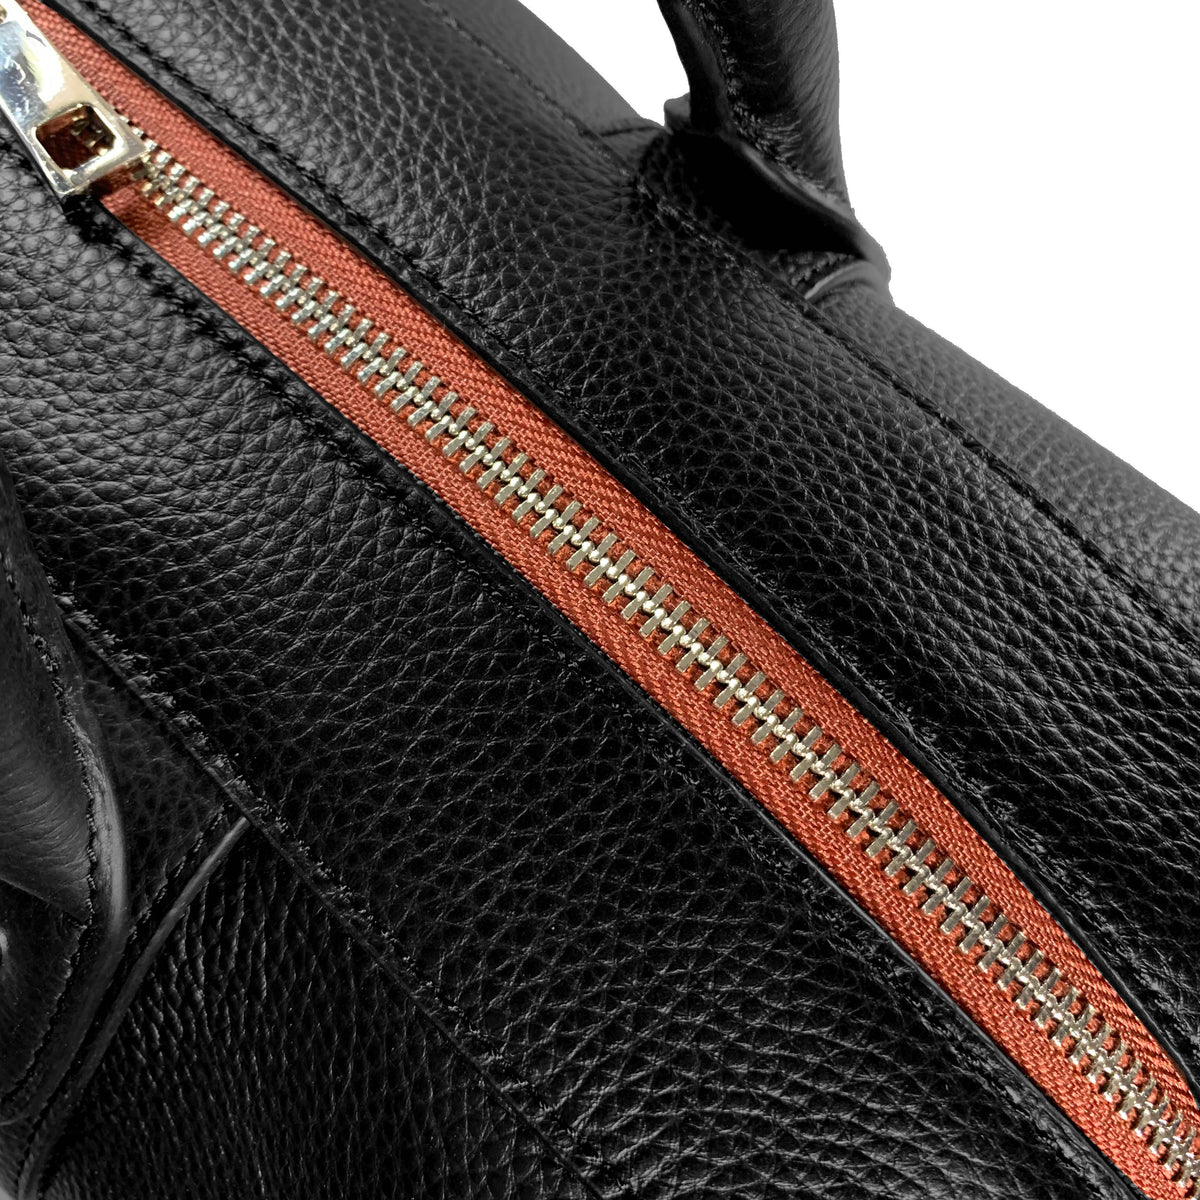 GRAND Leather Duffle Bag – christopher straub collection